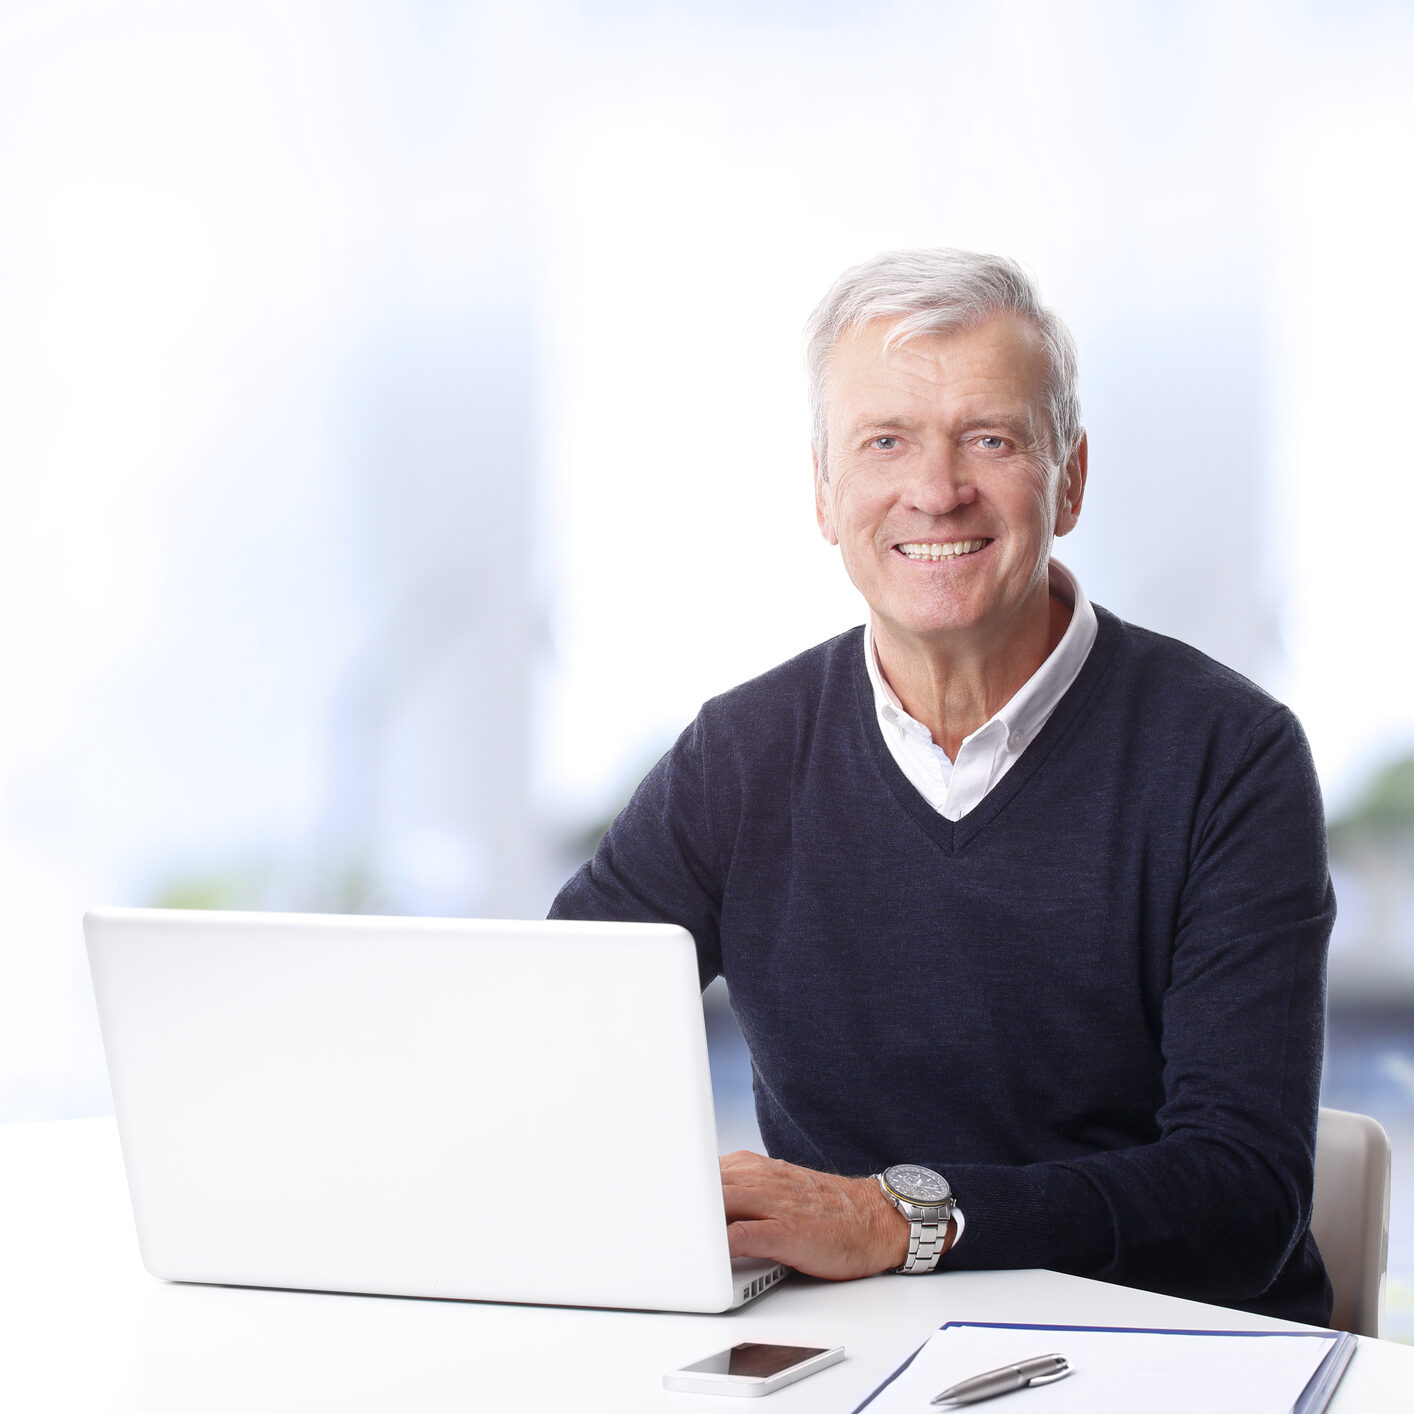 Close-up portrait of handsome senior businessman using a laptop while looking at camera.